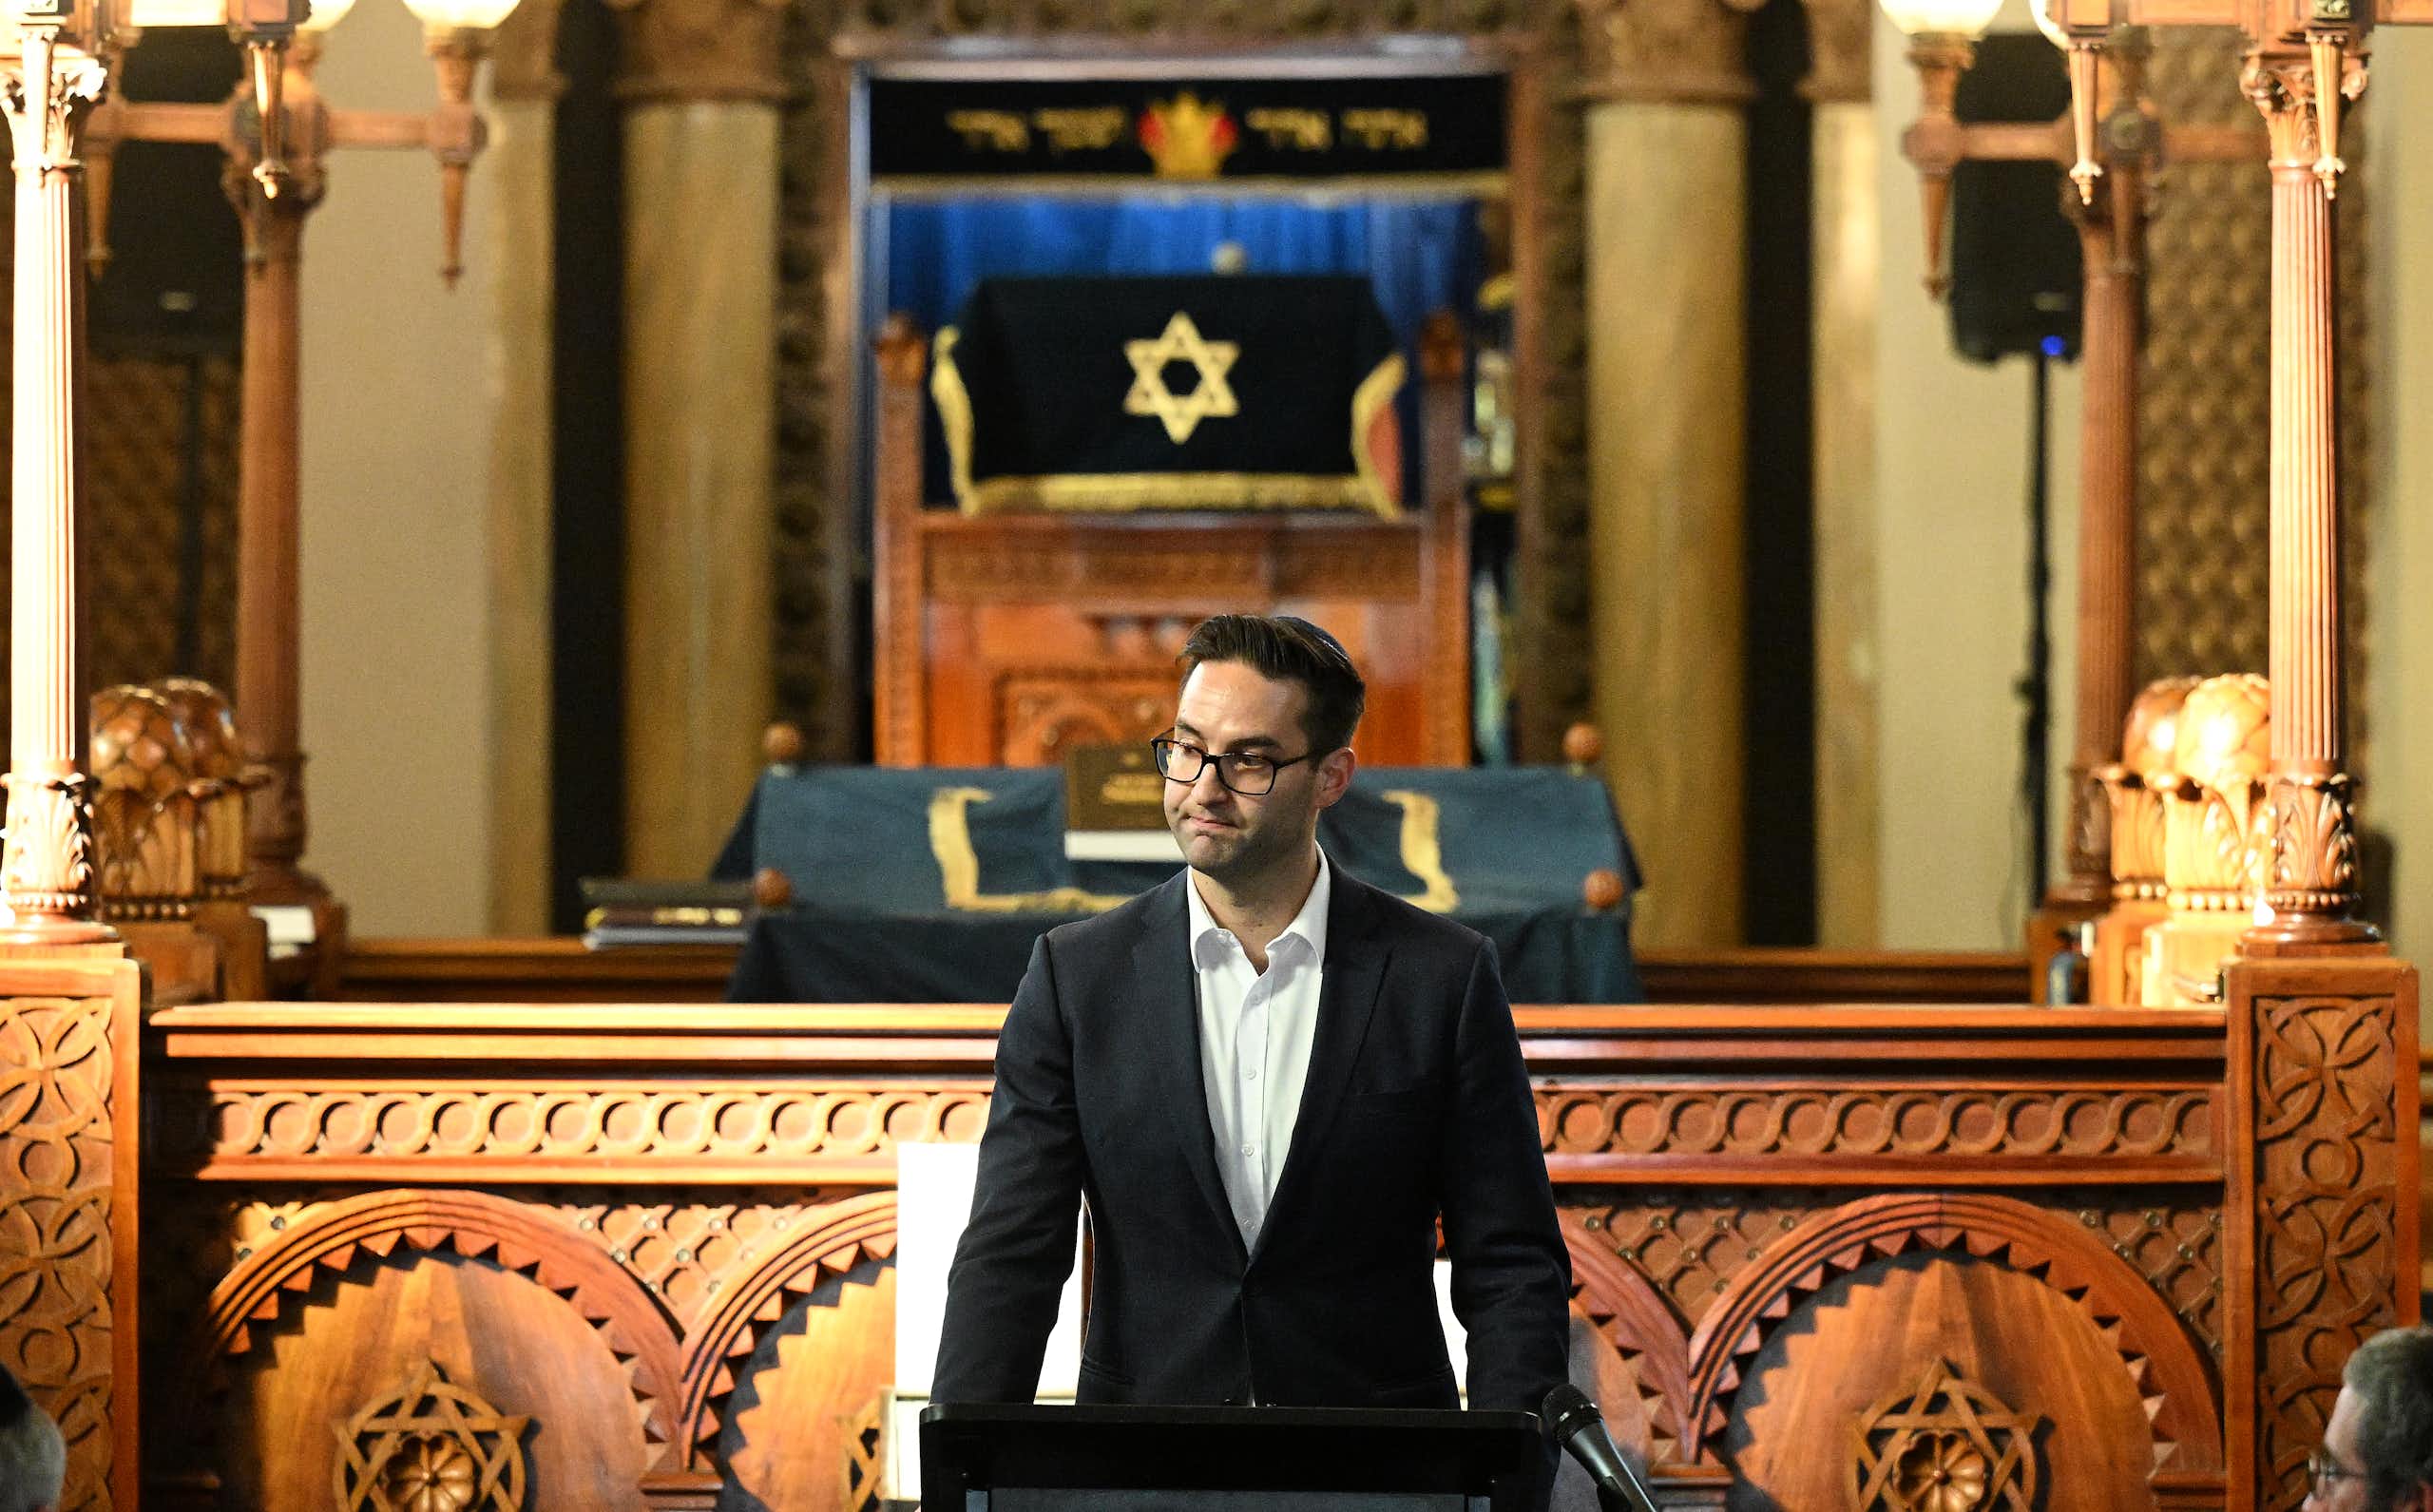 Politics with Michelle Grattan: Josh Burns on being a Jewish MP during a terrible conflict